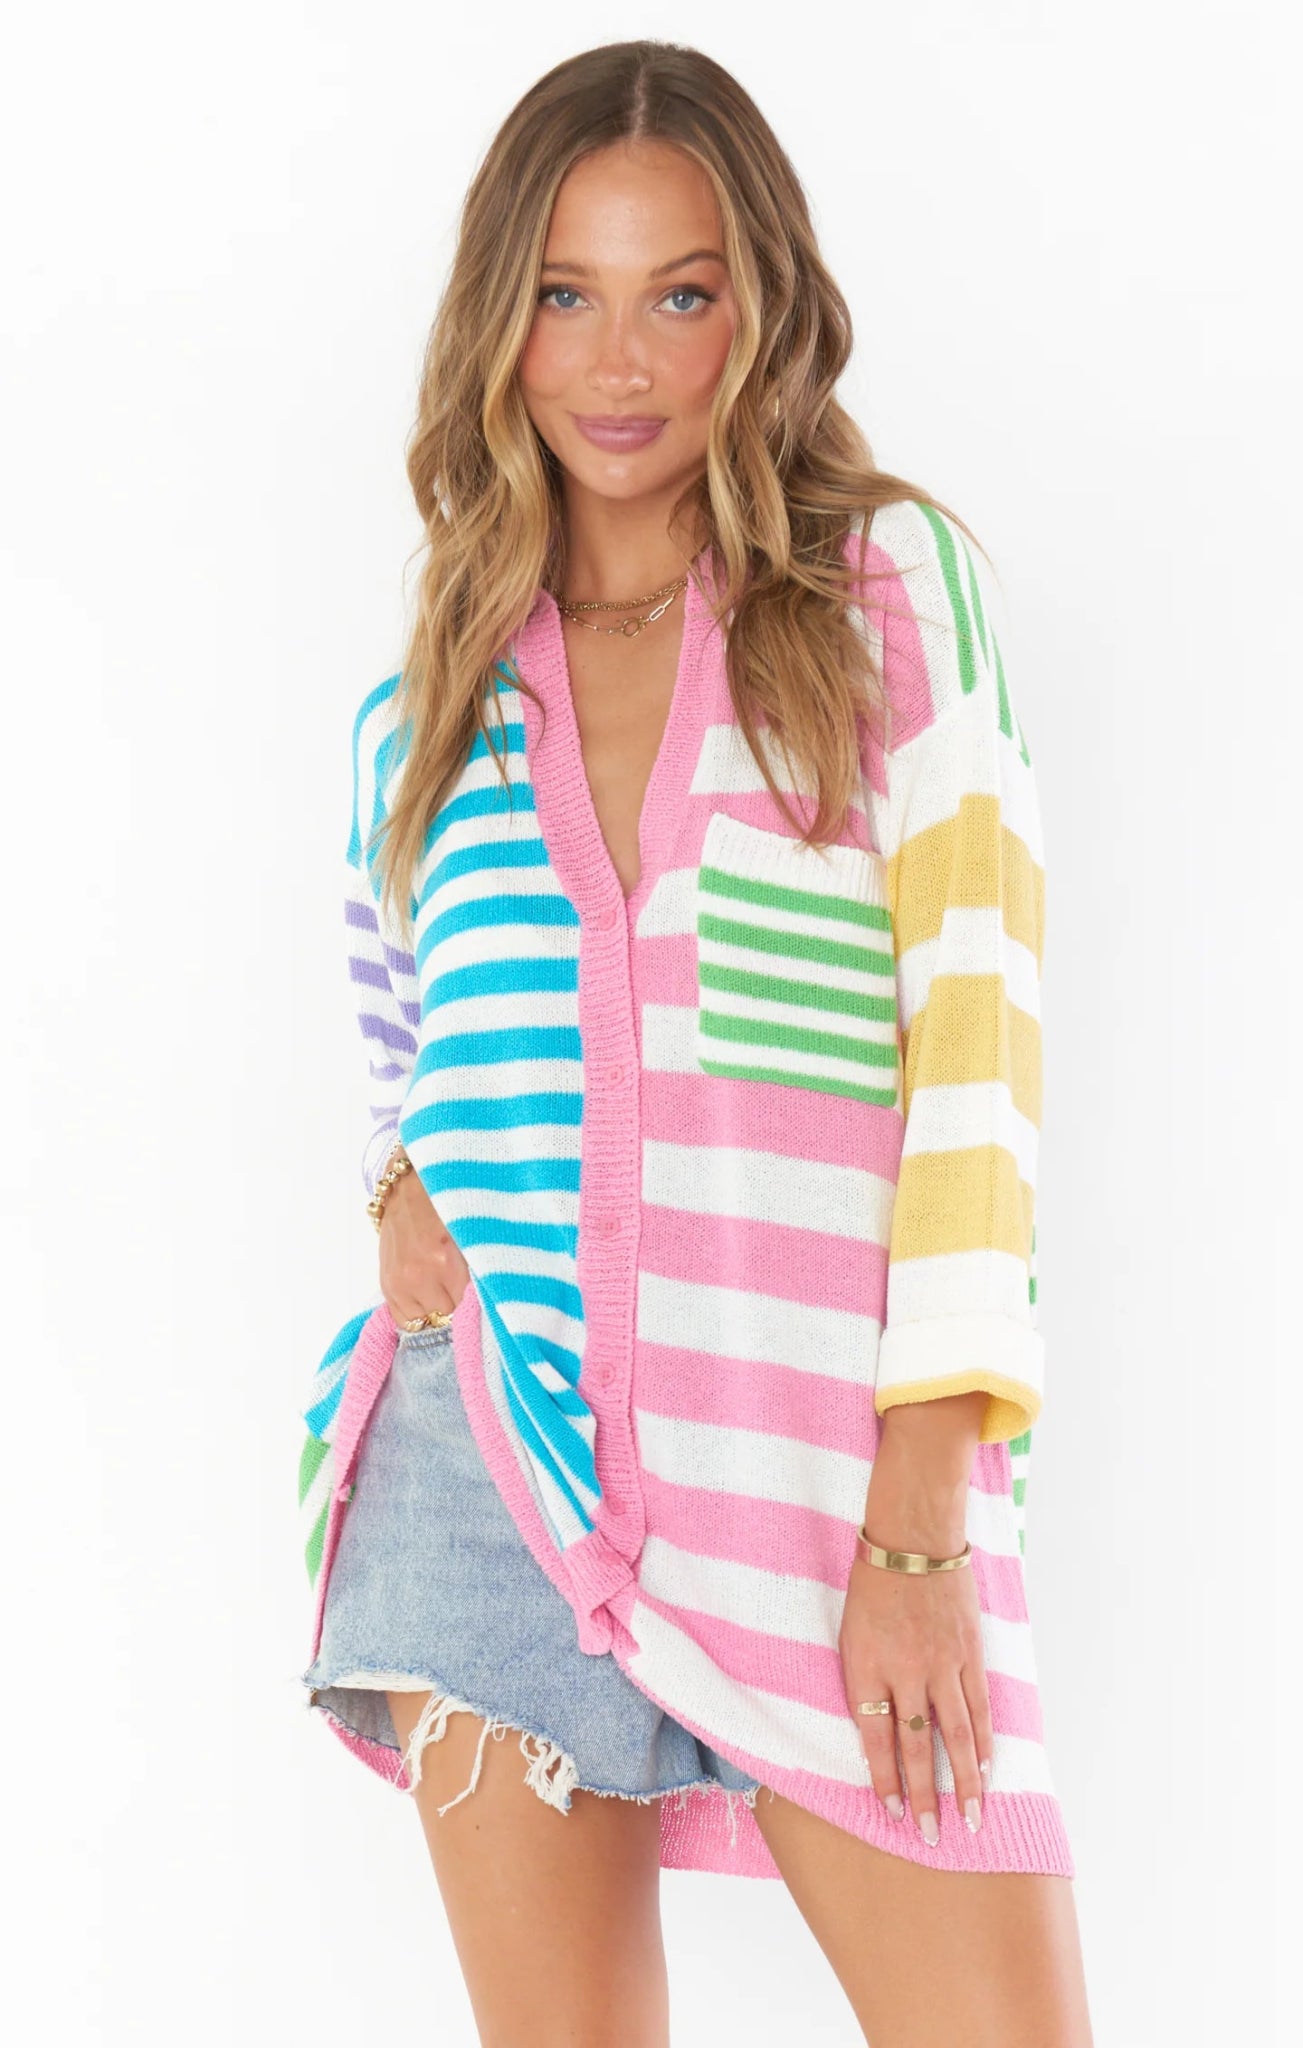 Shop Show Me Your Mumu Sonny Sweater Candy Chalk Knit - Premium Cardigan from Show Me Your Mumu Online now at Spoiled Brat 